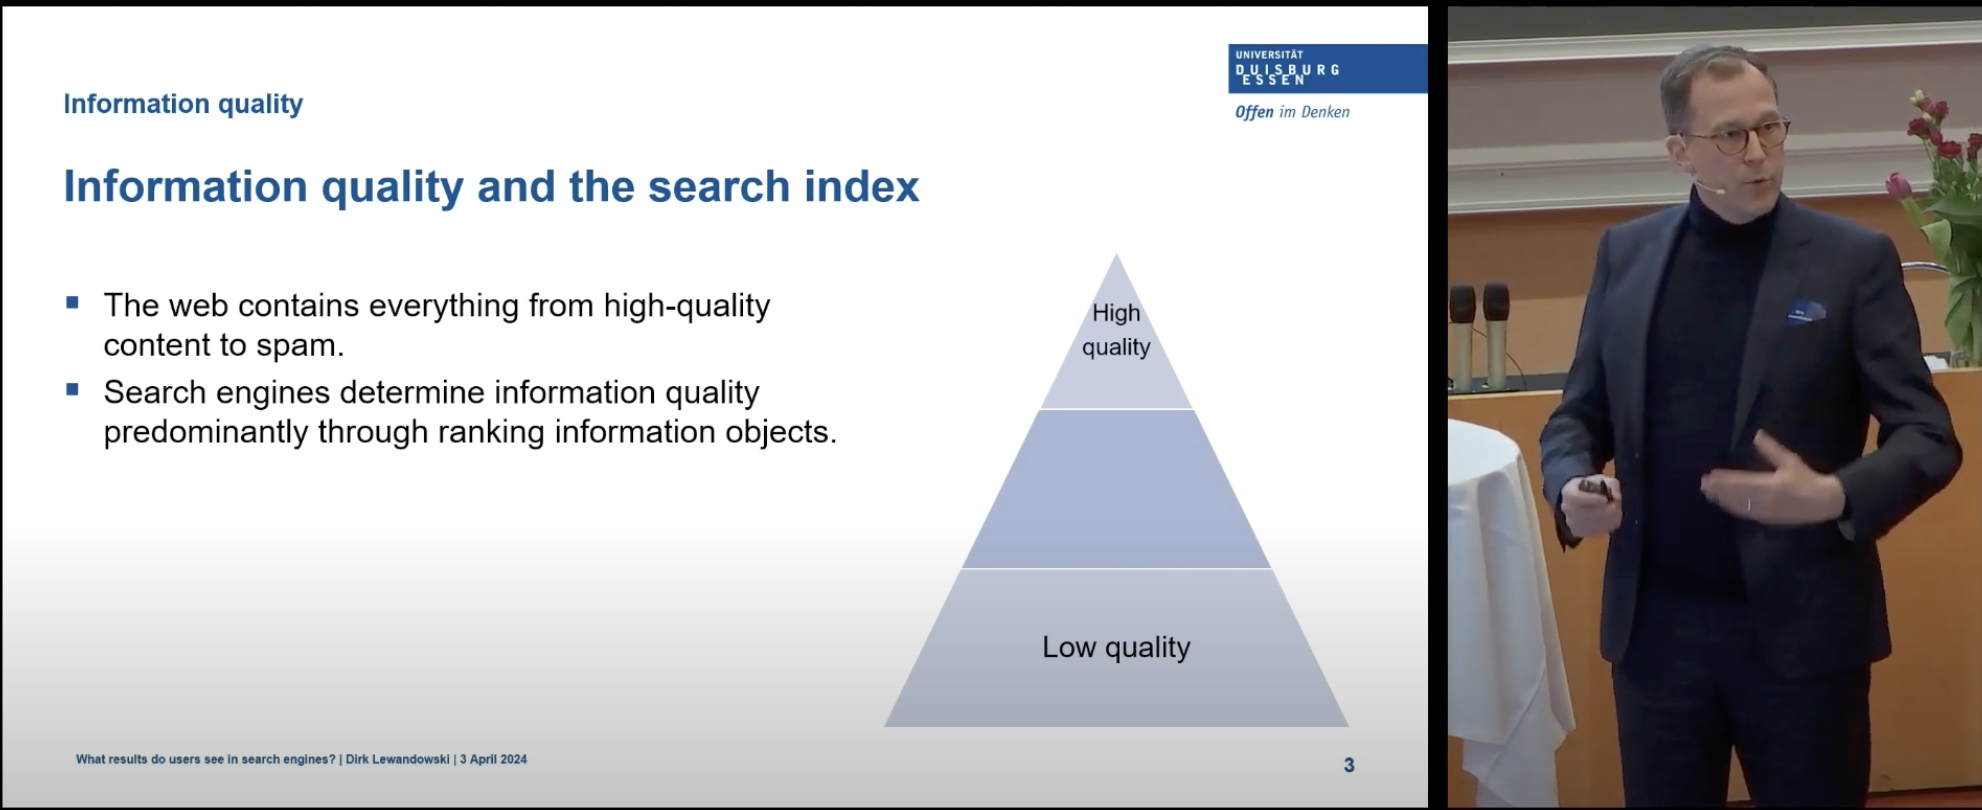 Video: What results do users see in search engines? Inclusion, exclusion and curation